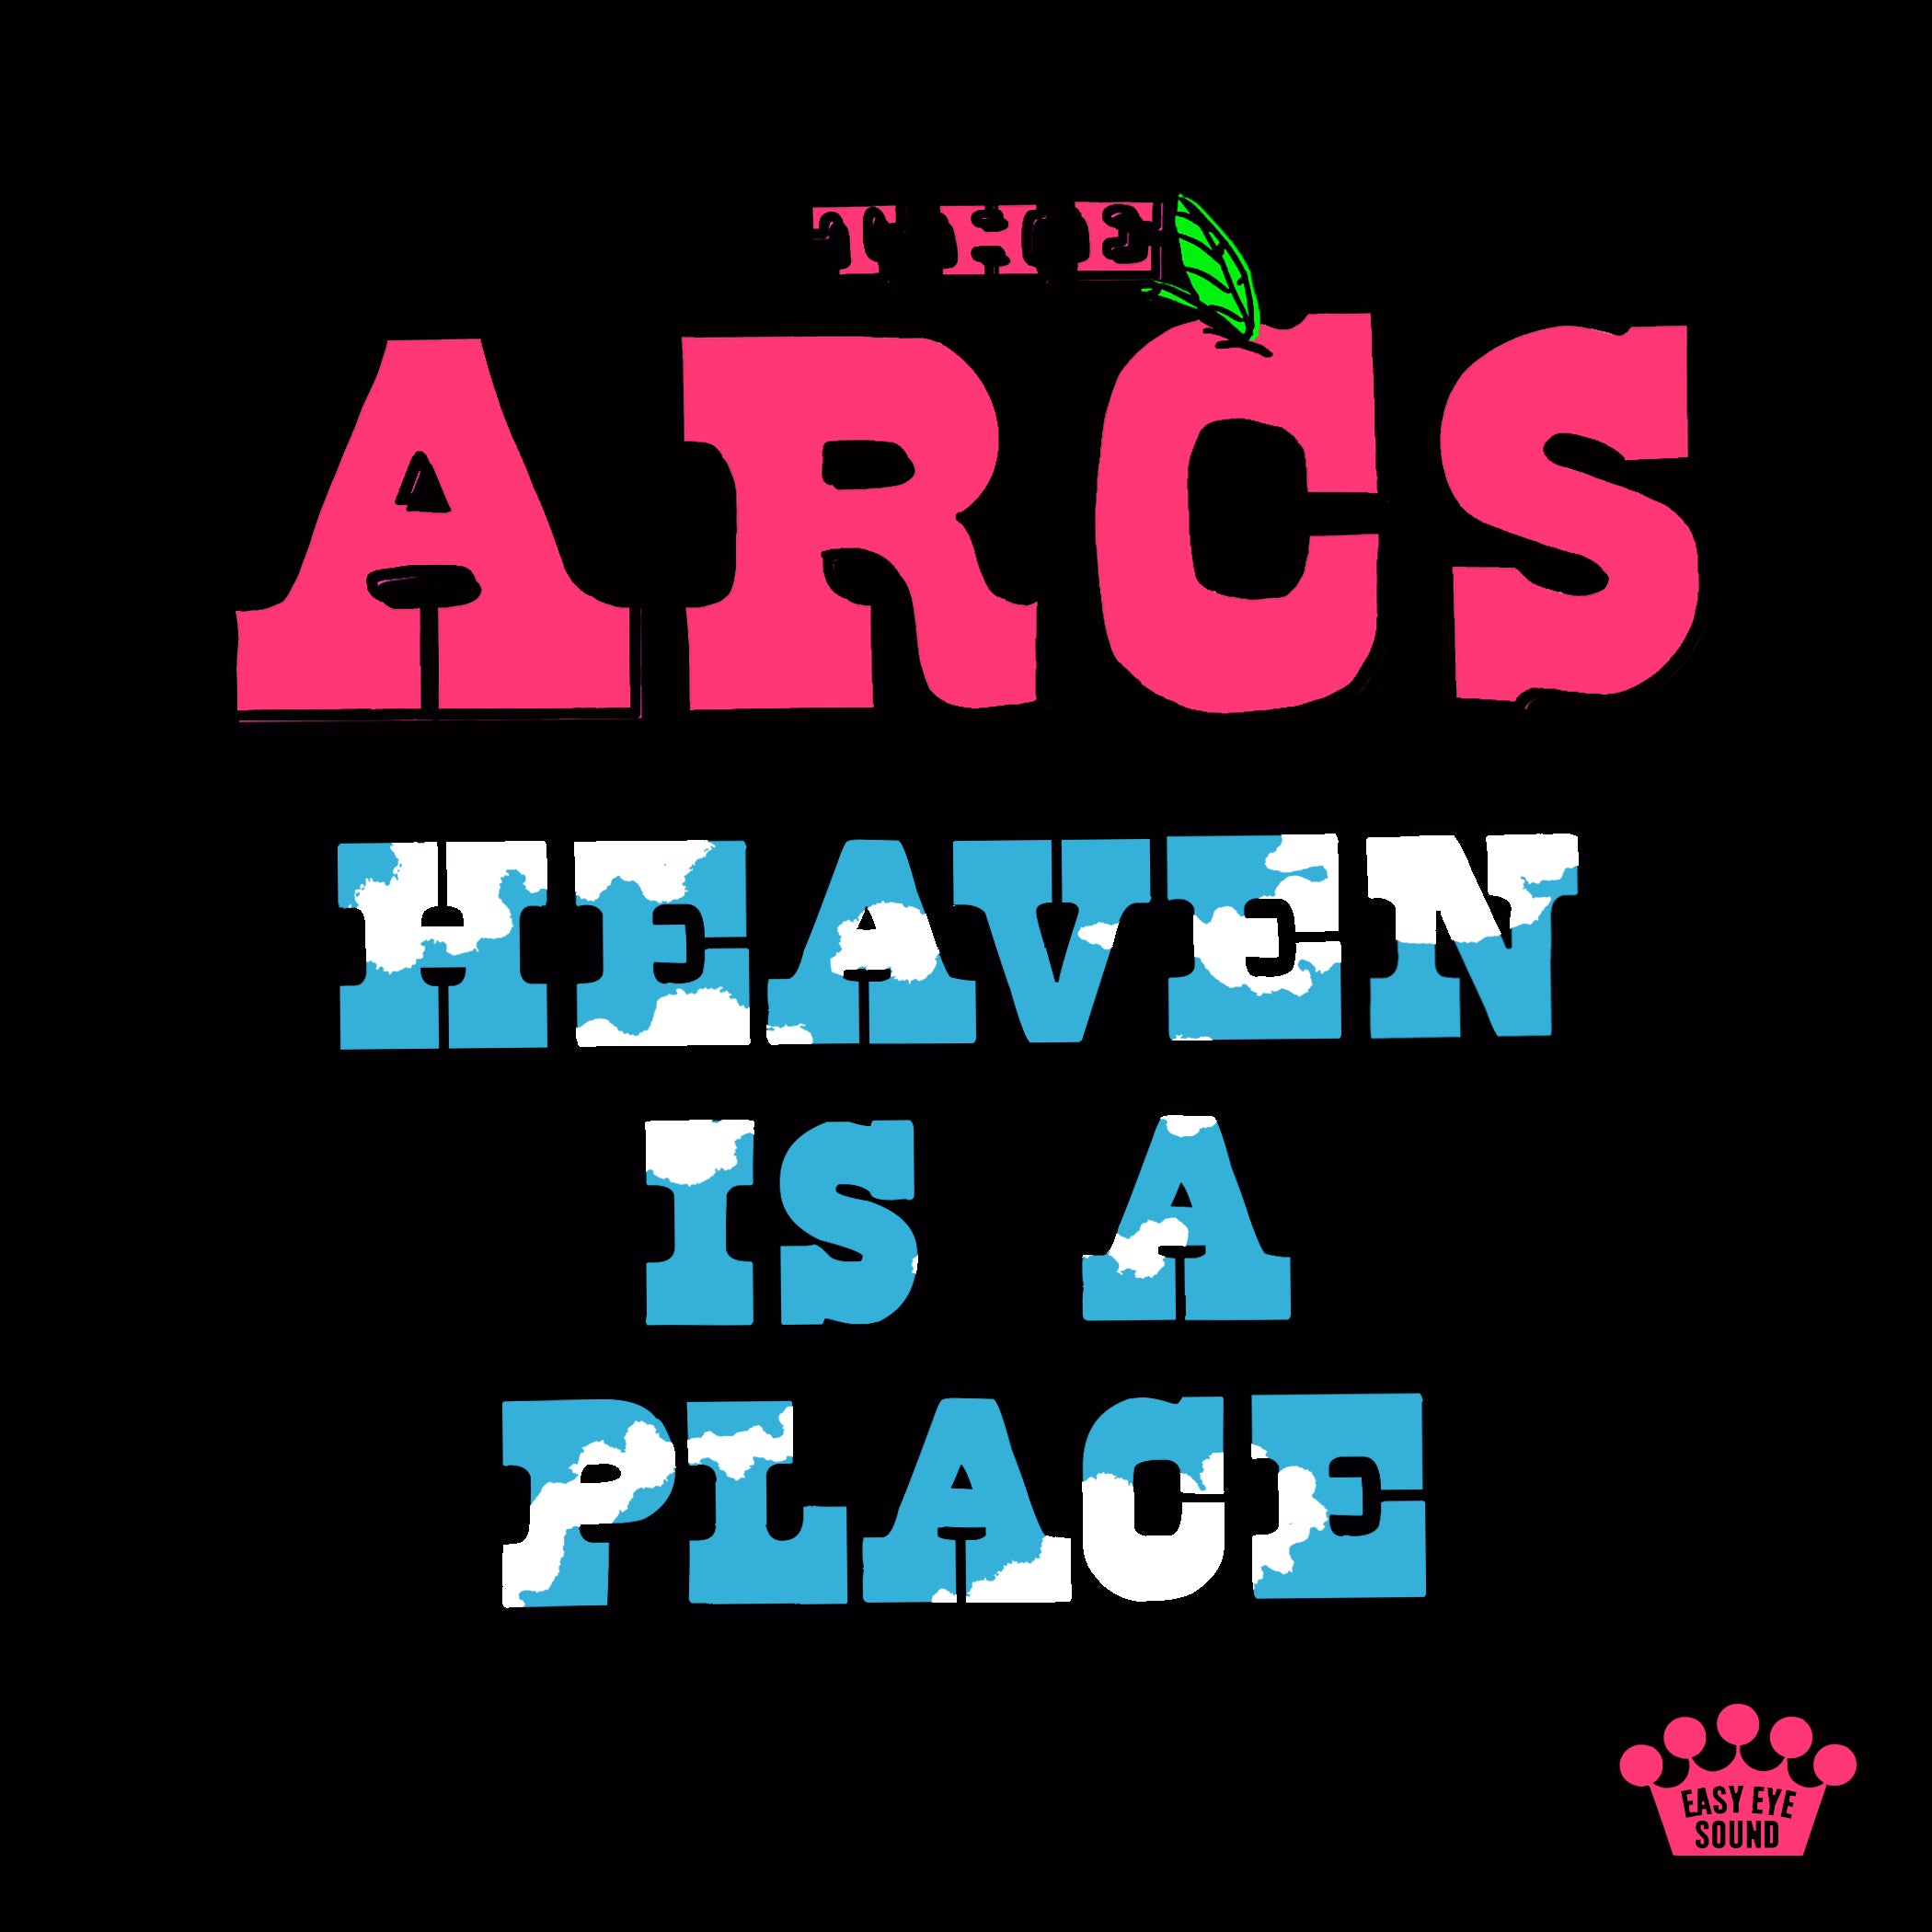 THE ARCS RELEASE NEW SINGLE “HEAVEN IS A PLACE”